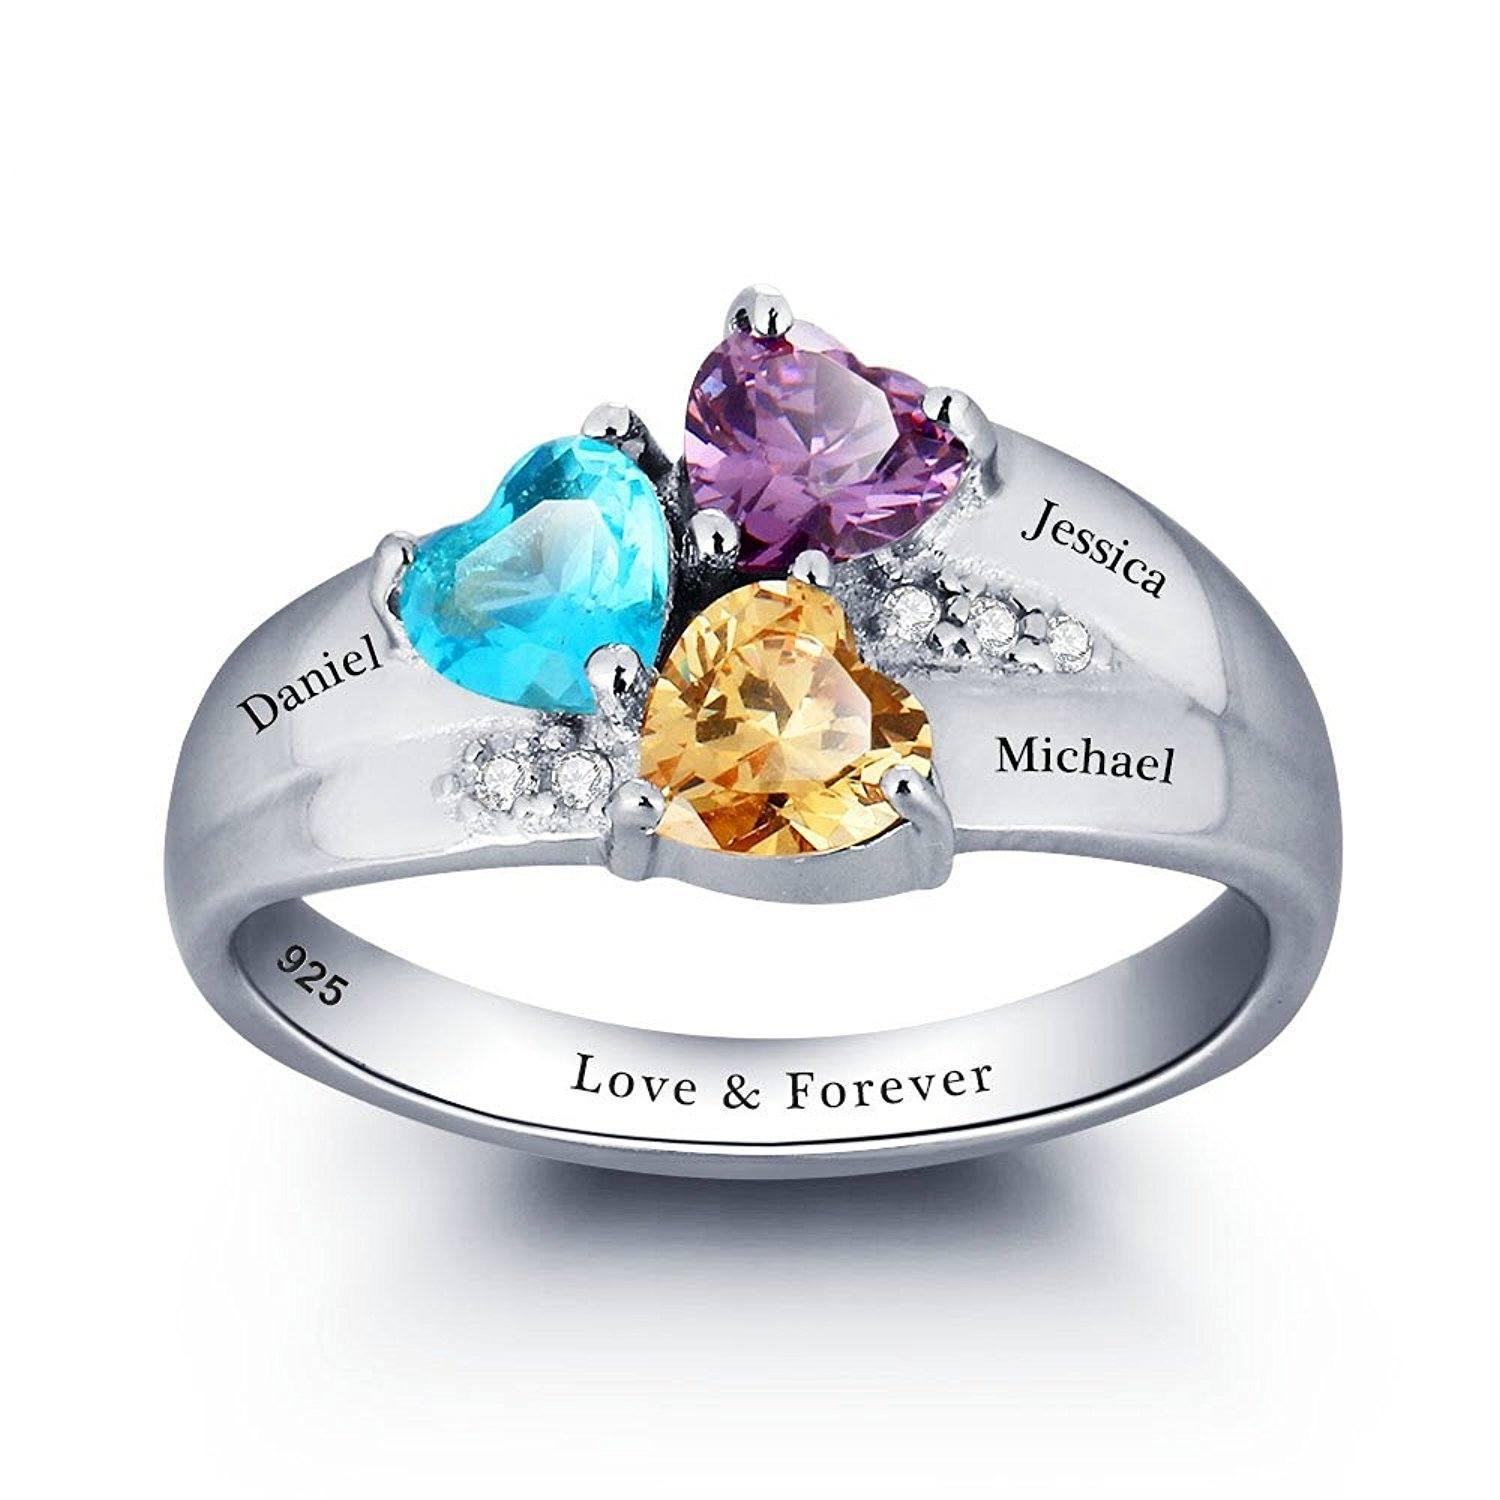 Mother's Ring with 3 Heart Birthstones_Rings_3 Name, 3 Stone, Accents, Aunt, Family Ring, Featured, Girlfriend, Grandma, Heart, Inside Engraving, Memorial, Mom, Mom Ring, Mother's Ring, New Baby, Ring, Rings, Size 10, Size 10.5, Size 11, Size 11.5, Size 12, Size 5, Size 5.5, Size 6, Size 6.5, Size 7, Size 7.5, Size 8, Size 8.5, Size 9, Size 9.5, Wife